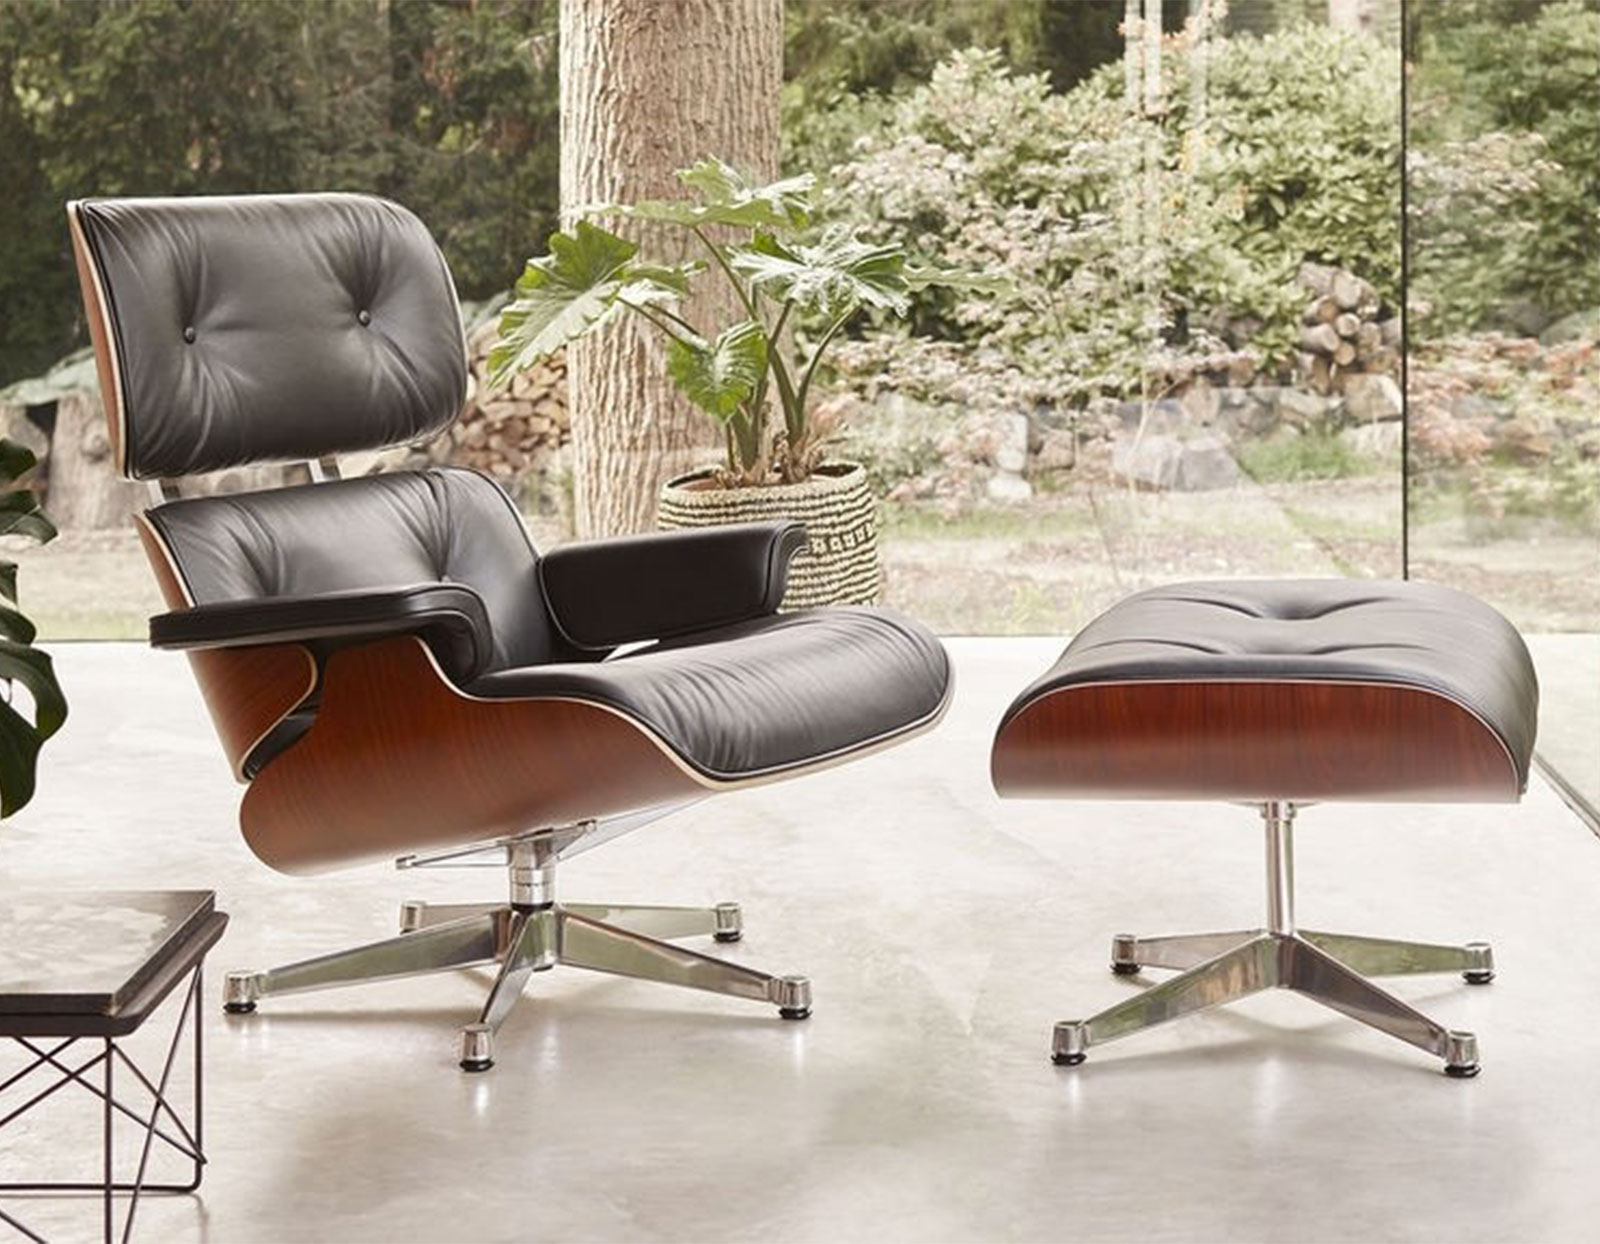 Vrijlating microscoop Reizende handelaar Eames Lounge Chair VITRA Charles & Ray Eames, 1956 - design-icons.it